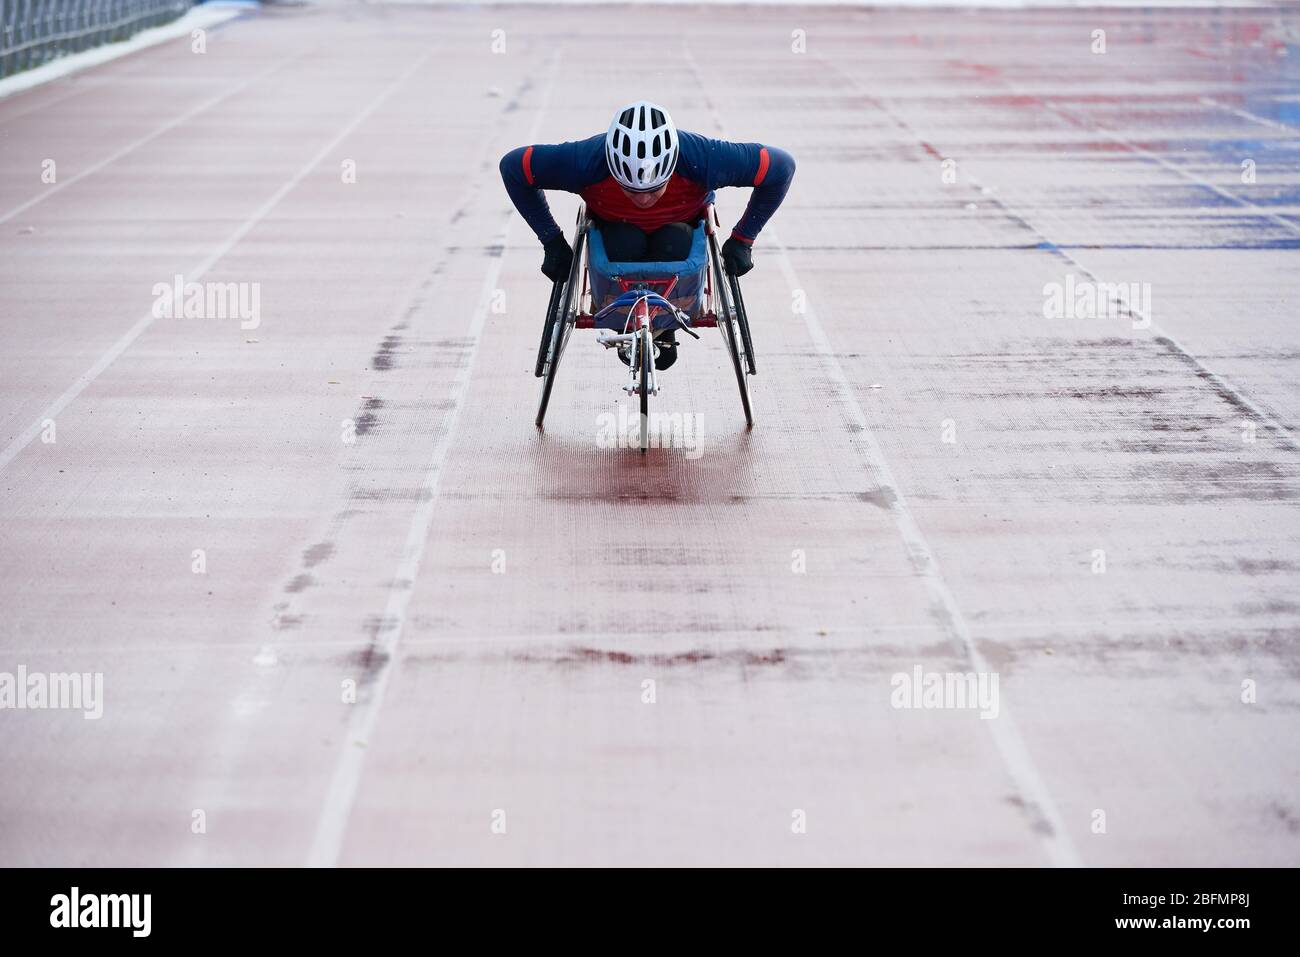 Preparing for Paralympics. Determined wheelchair racer in sportswear and helmet reaching finish line while training at outdoor track and field stadium Stock Photo